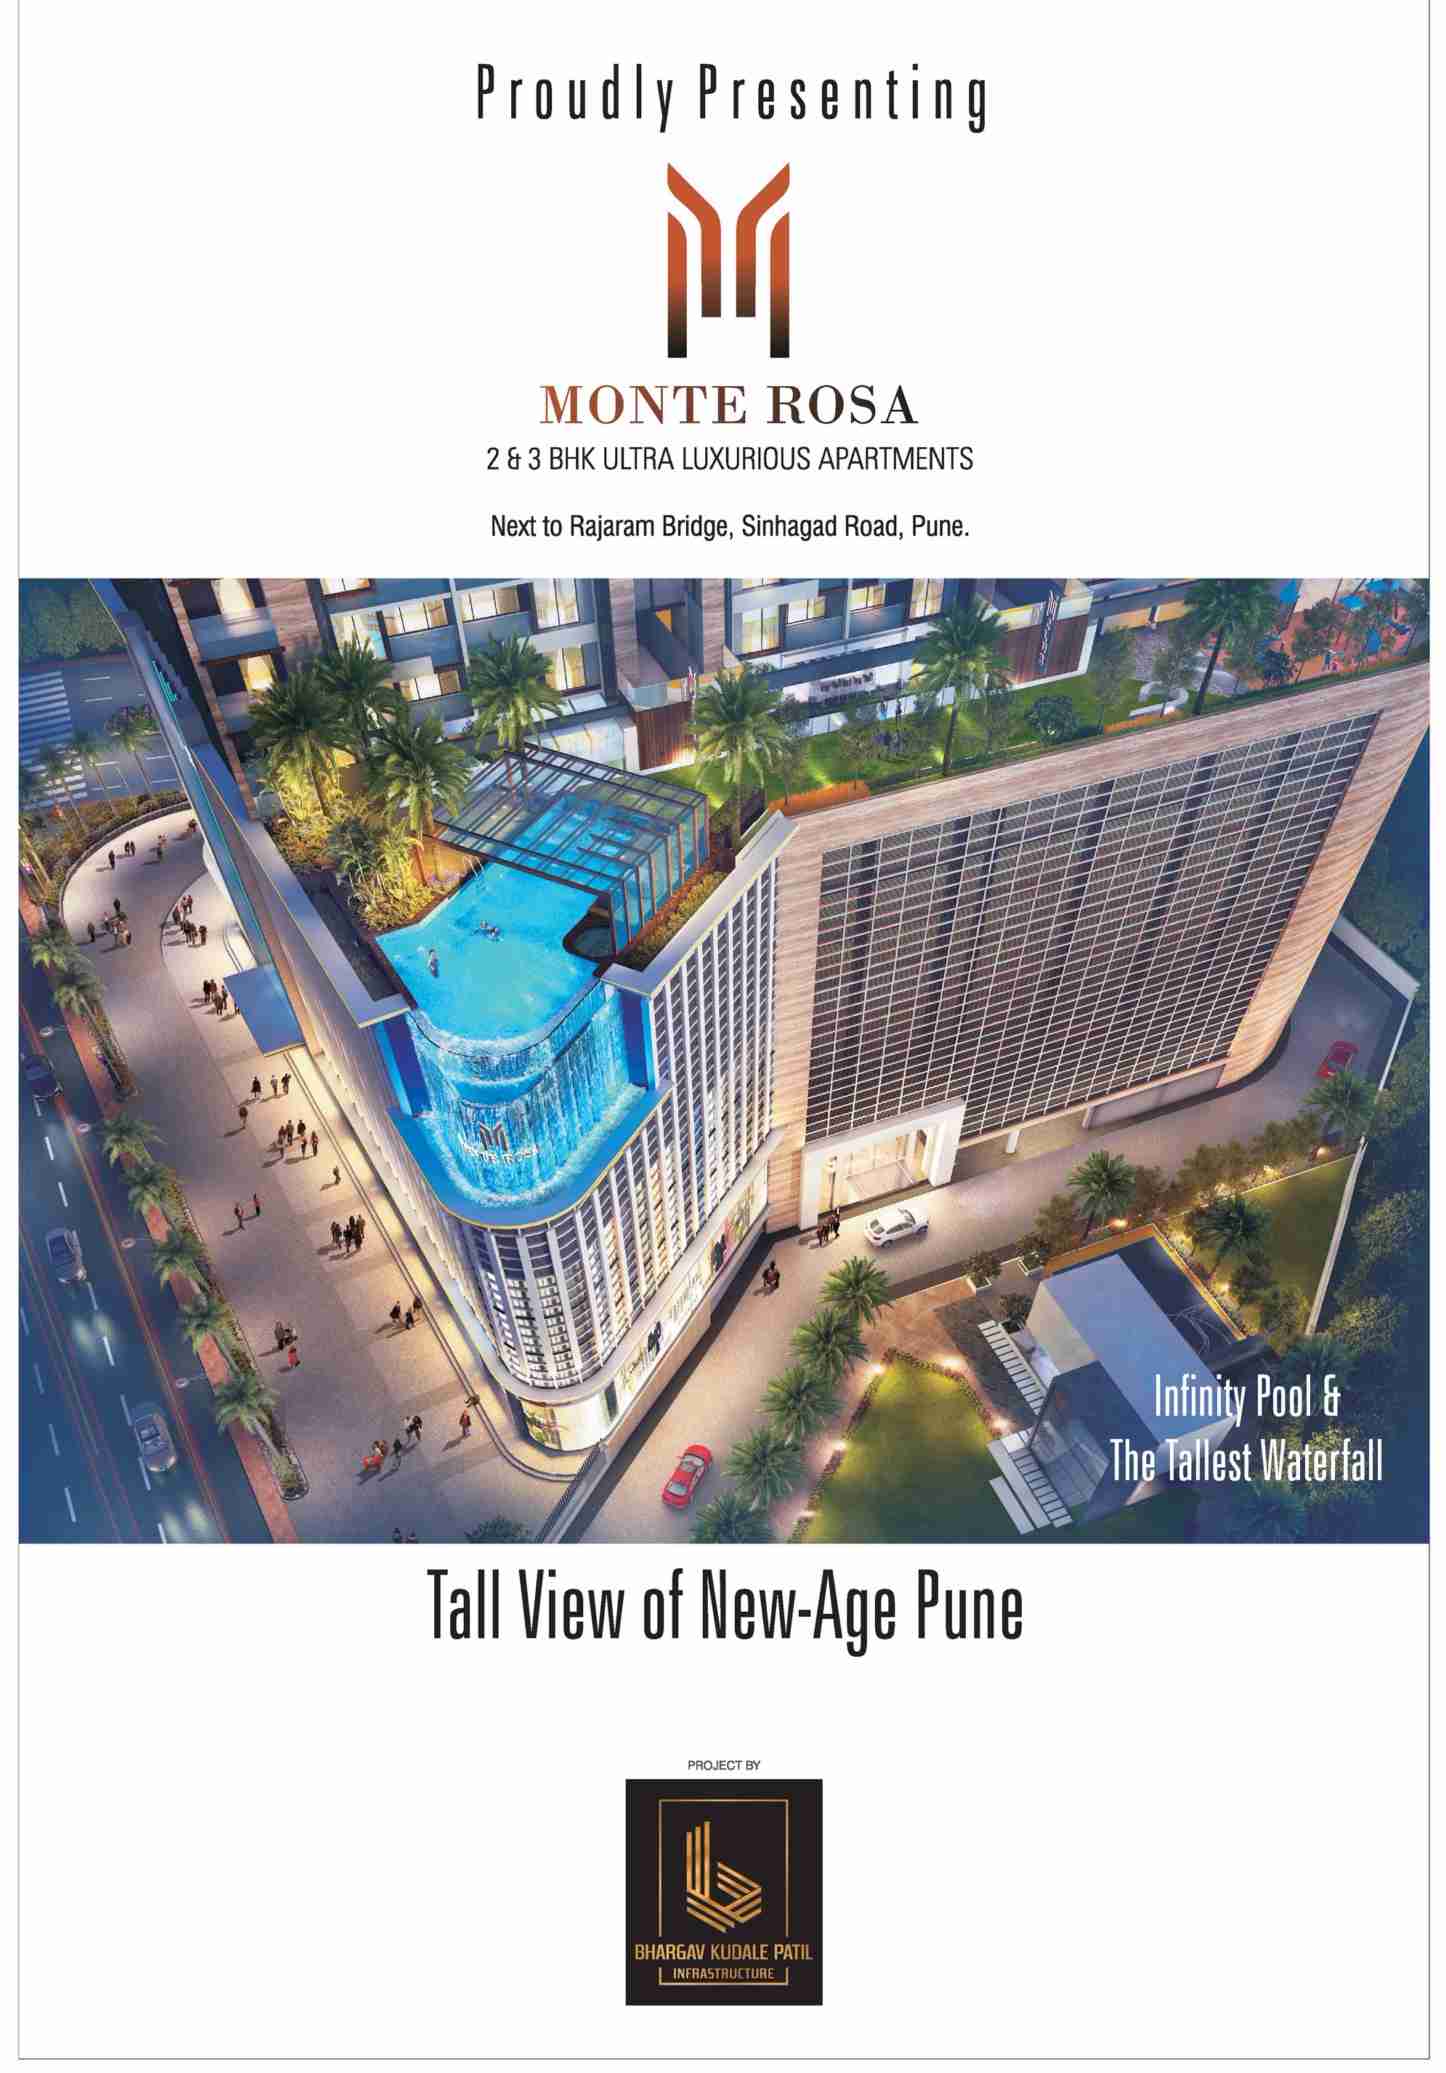 BKP proudly presents Monte Rosa with ultra luxurious apartments in Pune Update